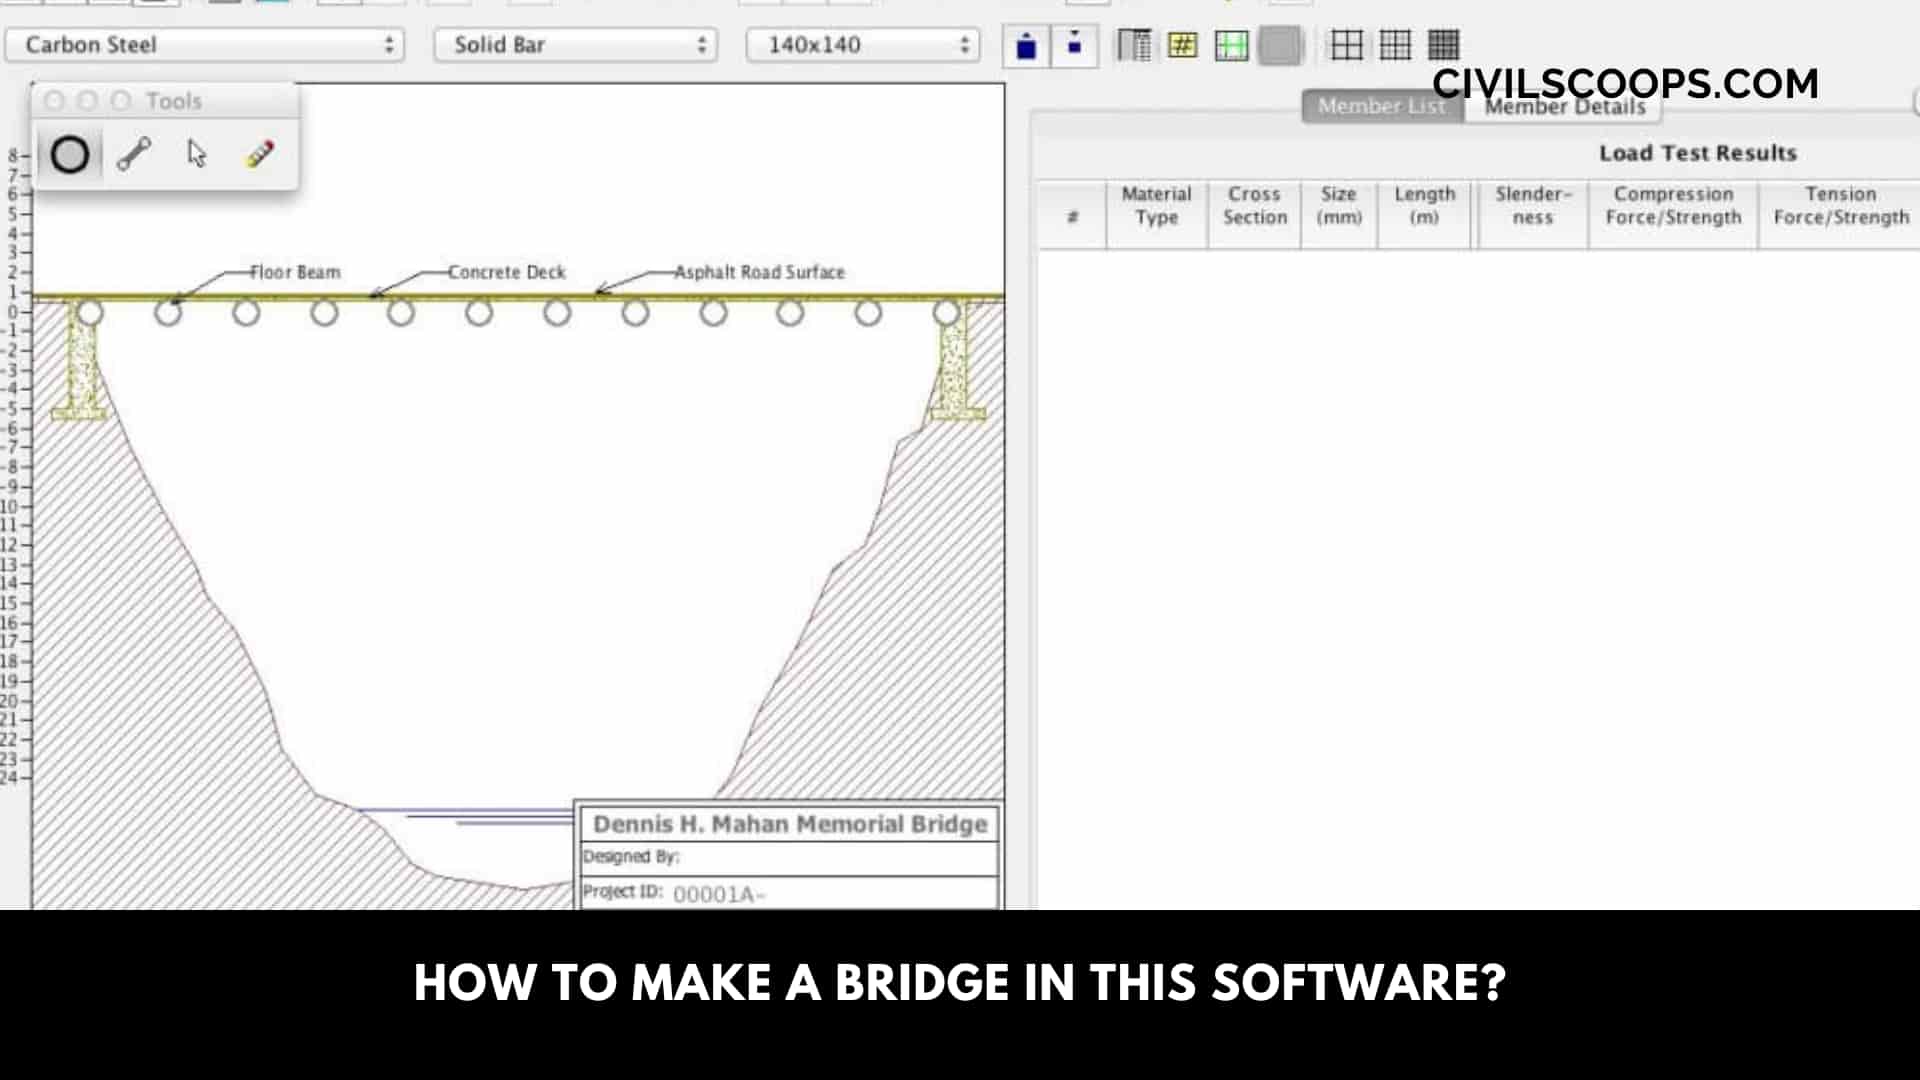 How to Make a Bridge in this Software?